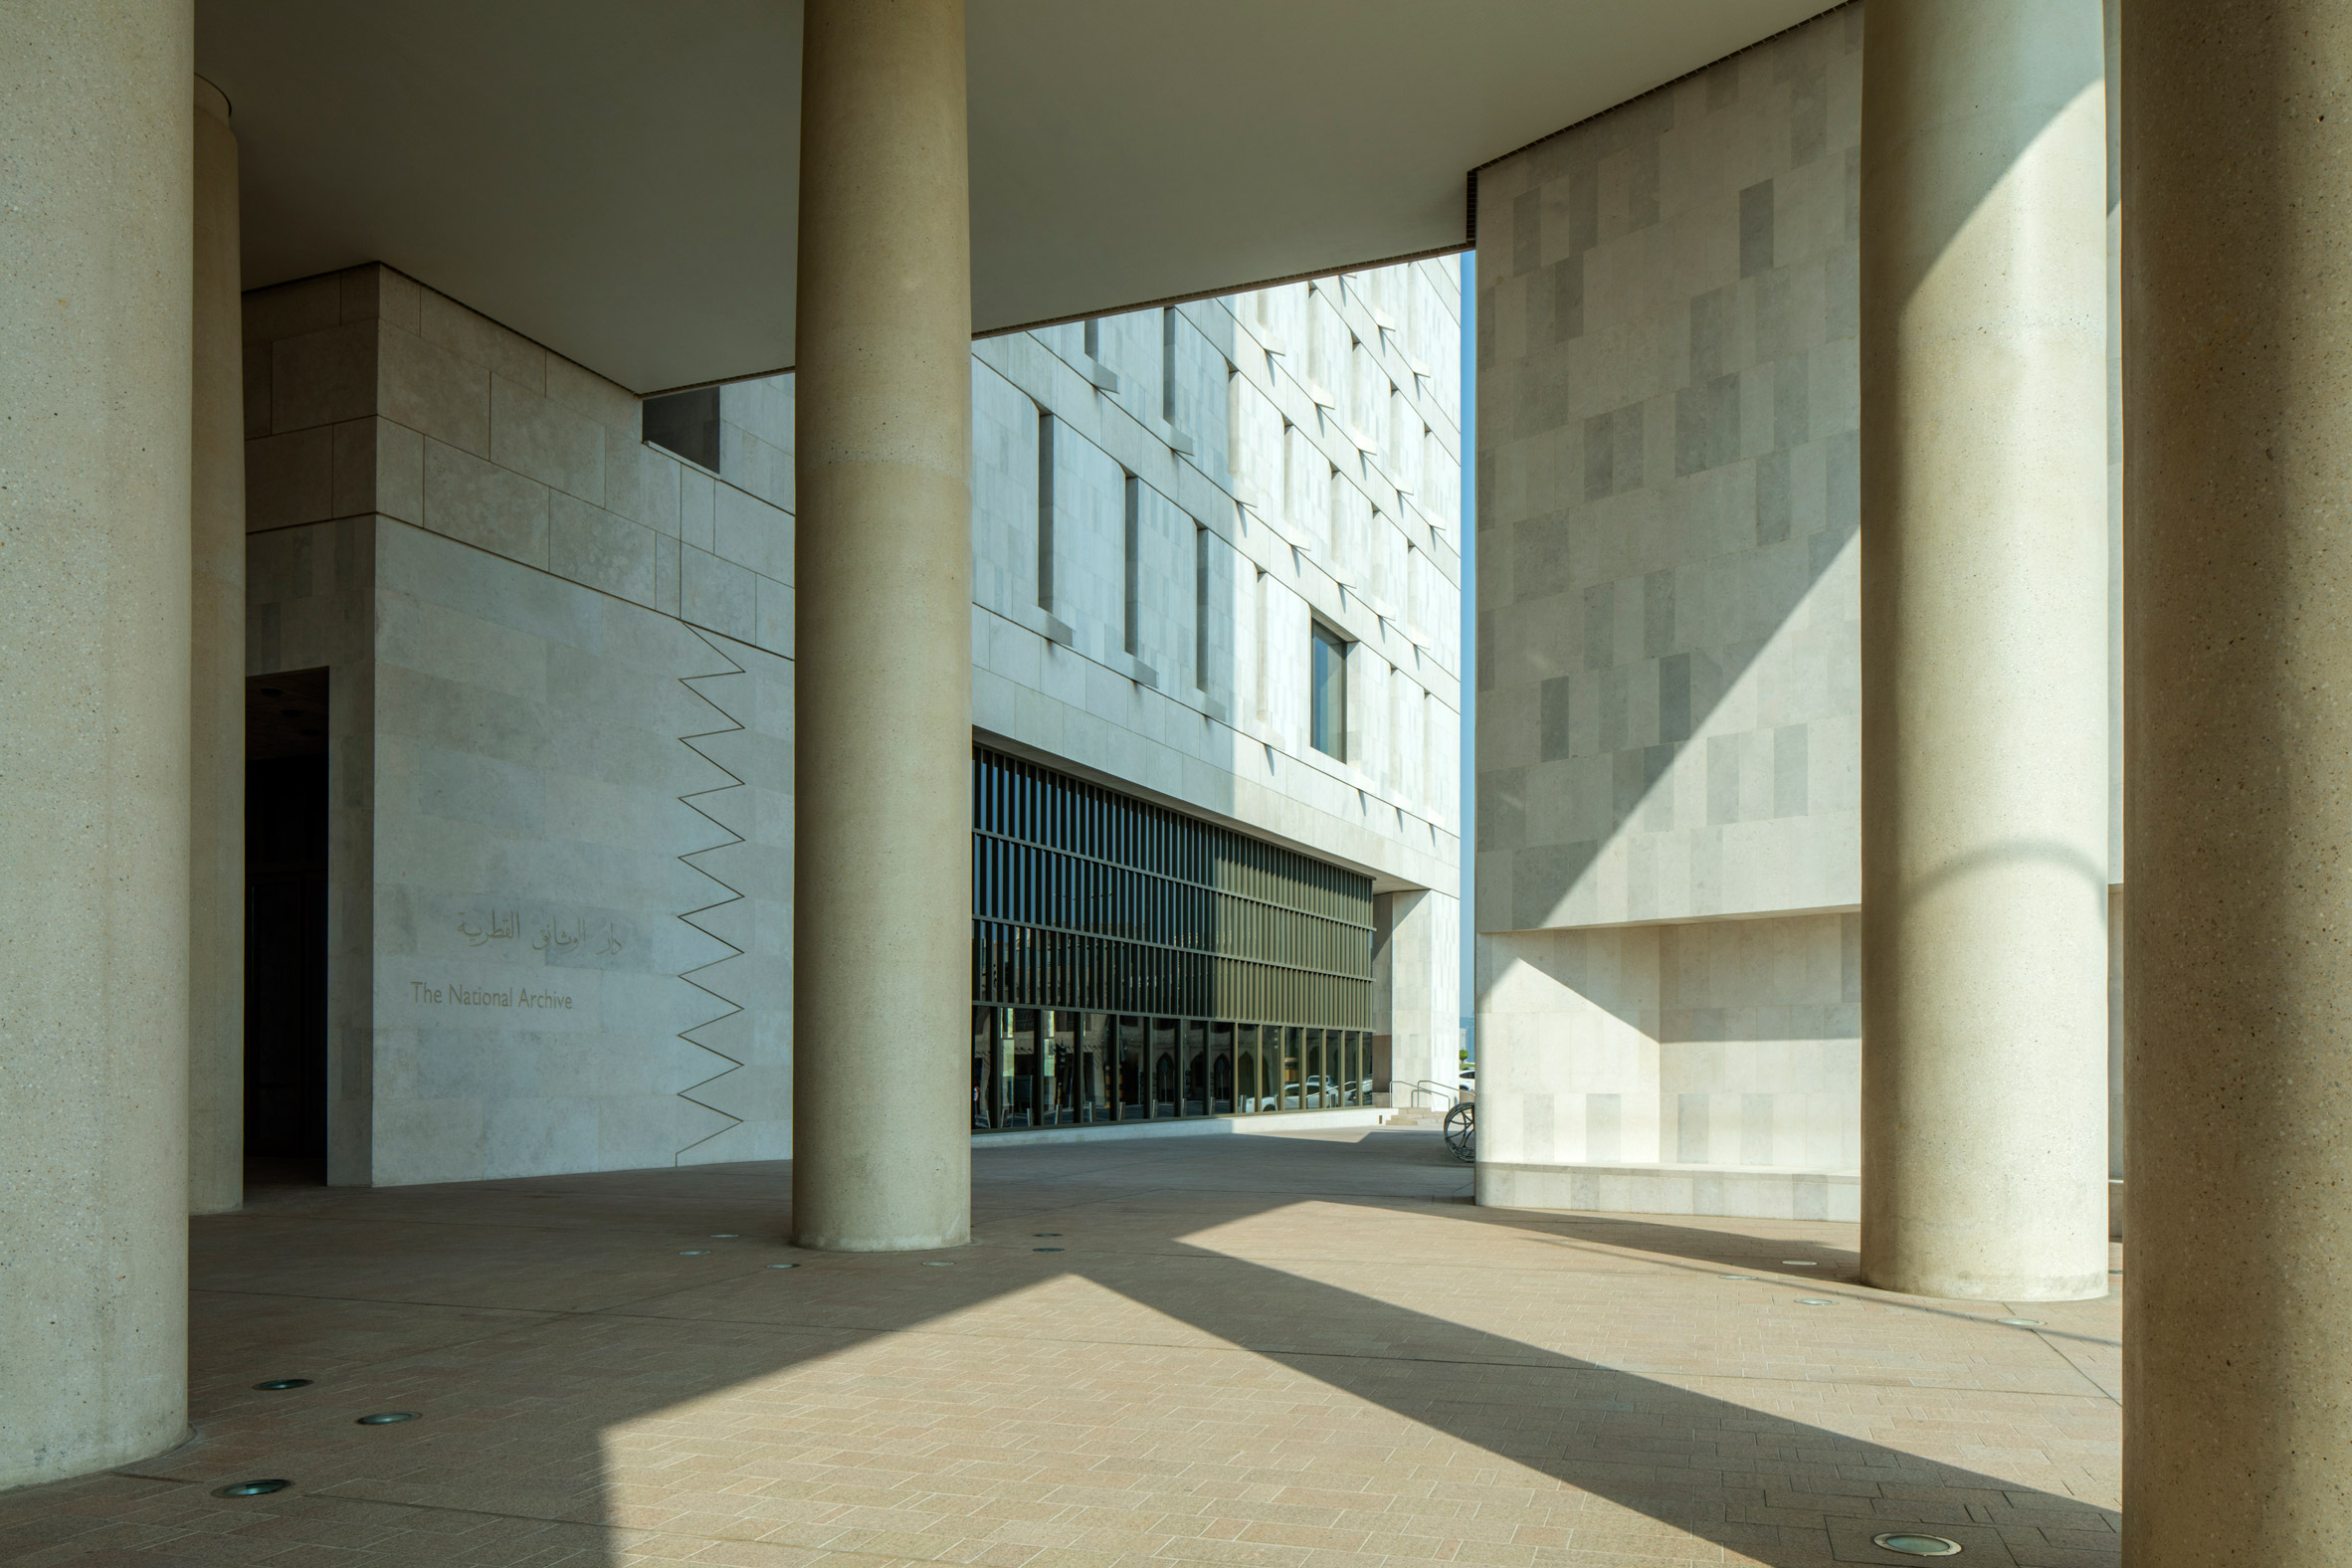 Qatar National Archive by Allies and Morrison